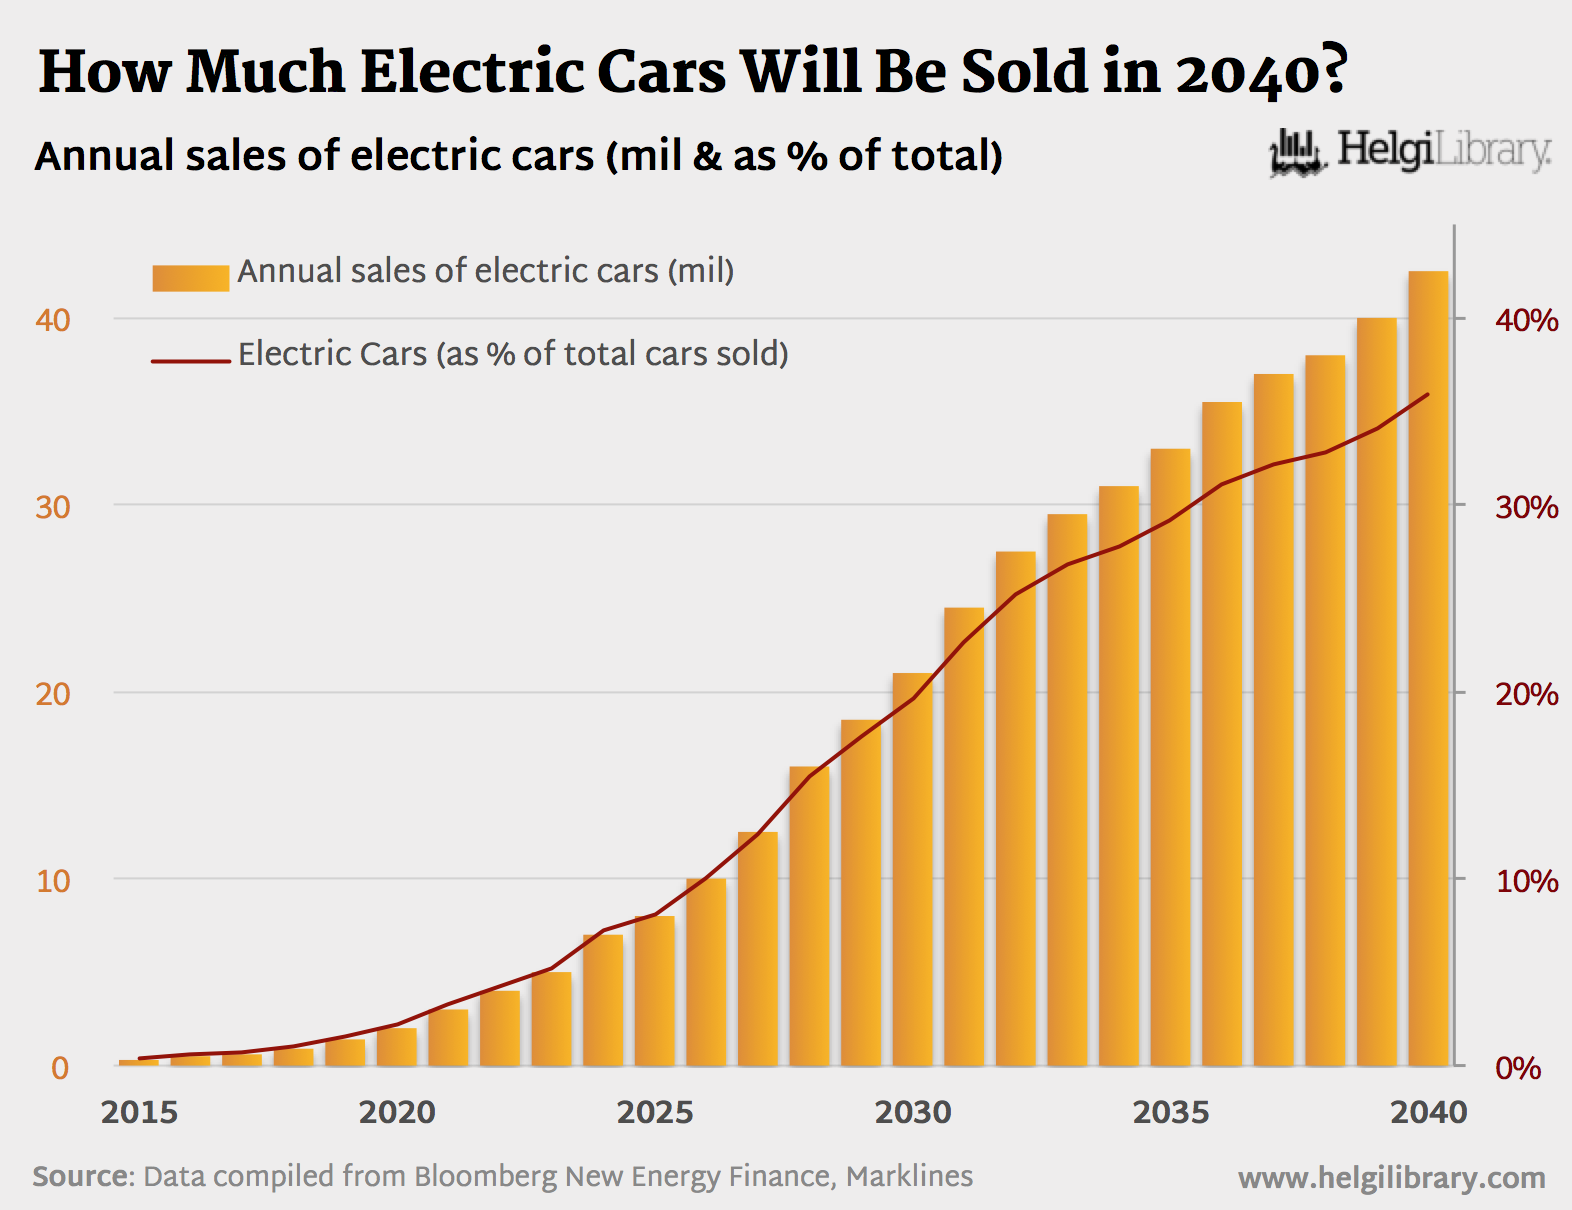 How Many Electric Cars Will Be Sold in 2040? Helgi Library